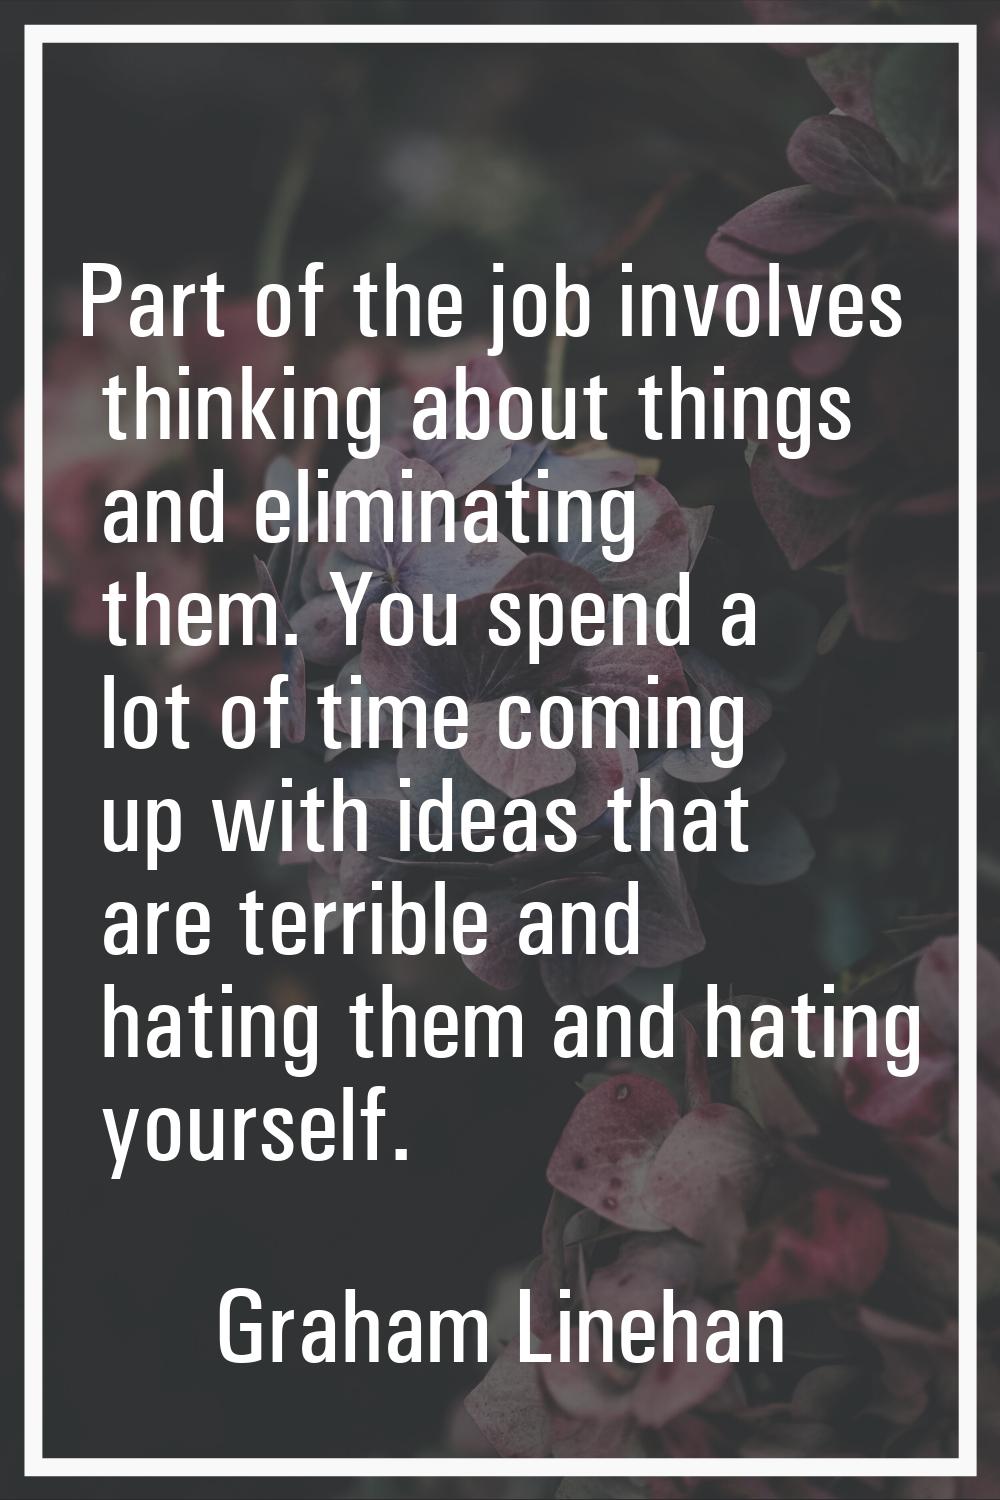 Part of the job involves thinking about things and eliminating them. You spend a lot of time coming